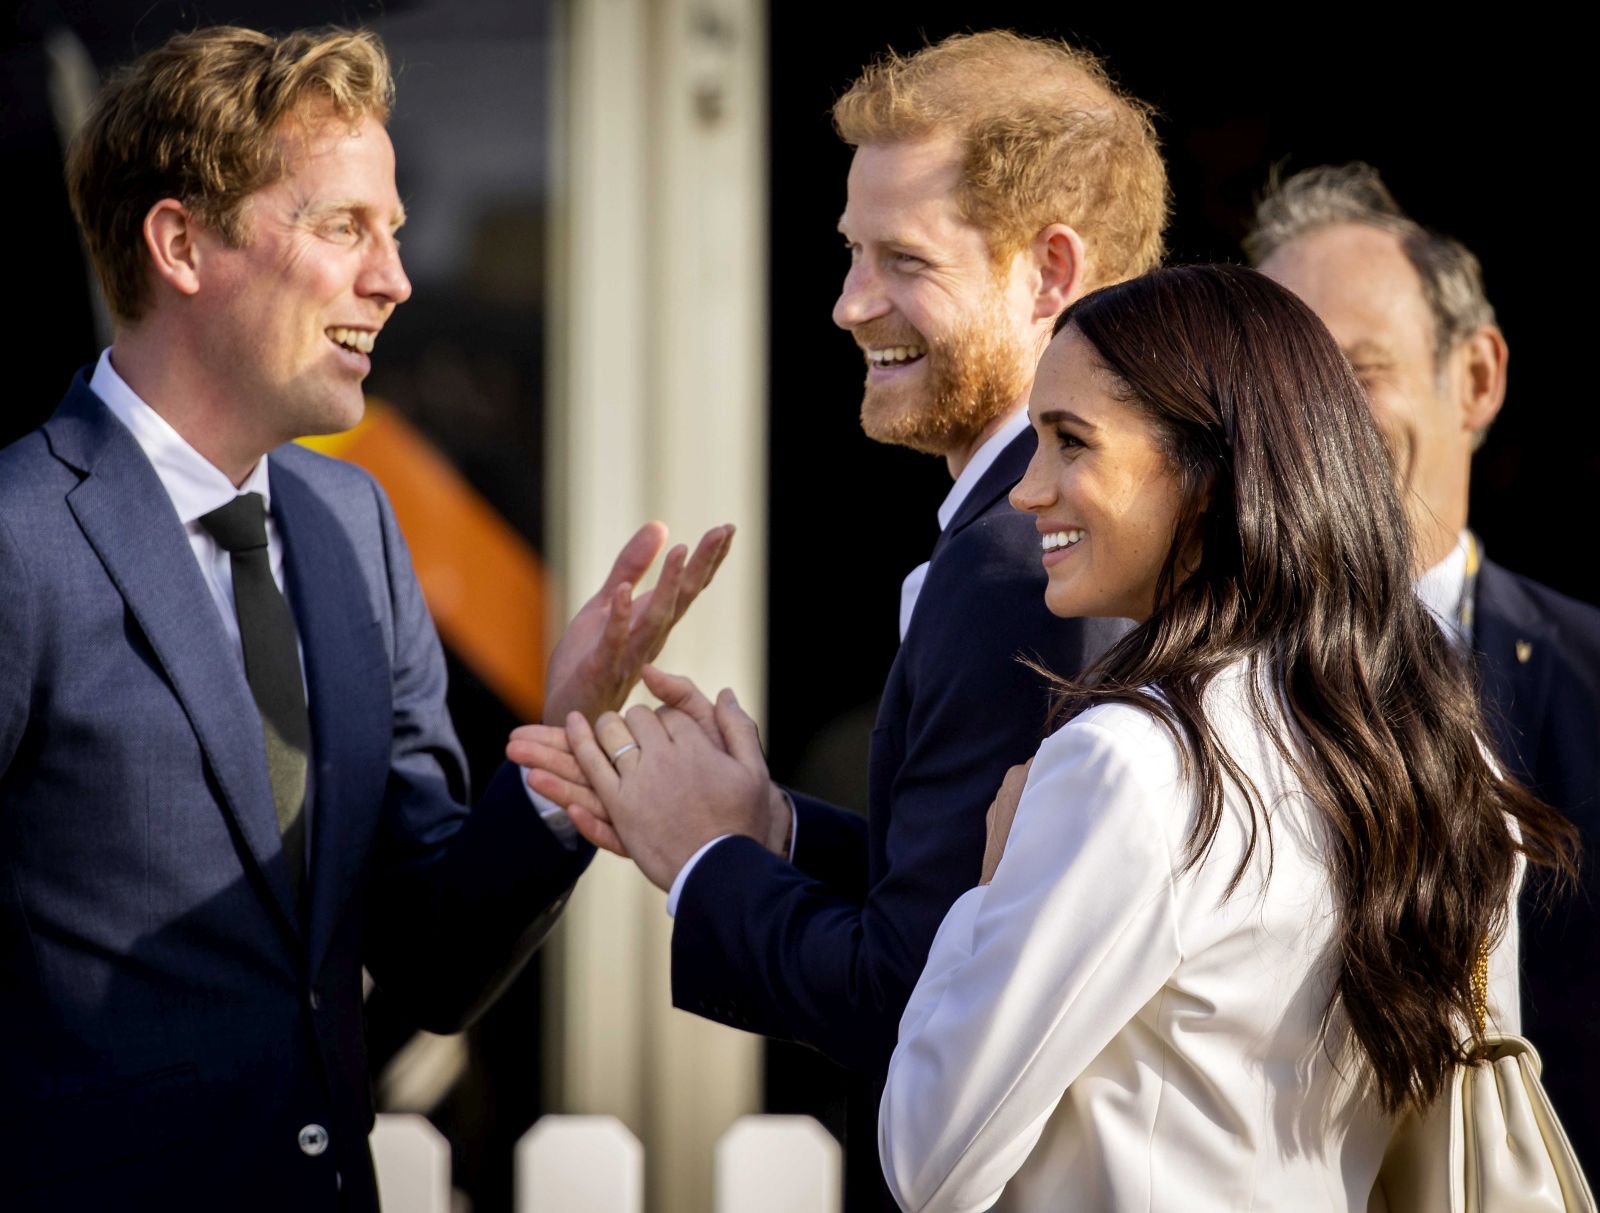 epa09891711 Britain's Prince Harry, Duke of Sussex (C) and his wife, Meghan, Duchess of Sussex (R) arrive on the Yellow Carpet before the start of the Invictus Games in The Hague, The Netherlands, 15 April 2022. The Invictus Games will take place from 16 to 22 April 2022 at the Zuiderpark and are intended for military personnel and veterans who have been psychologically or physically injured in service.  EPA/REMKO DE WAAL